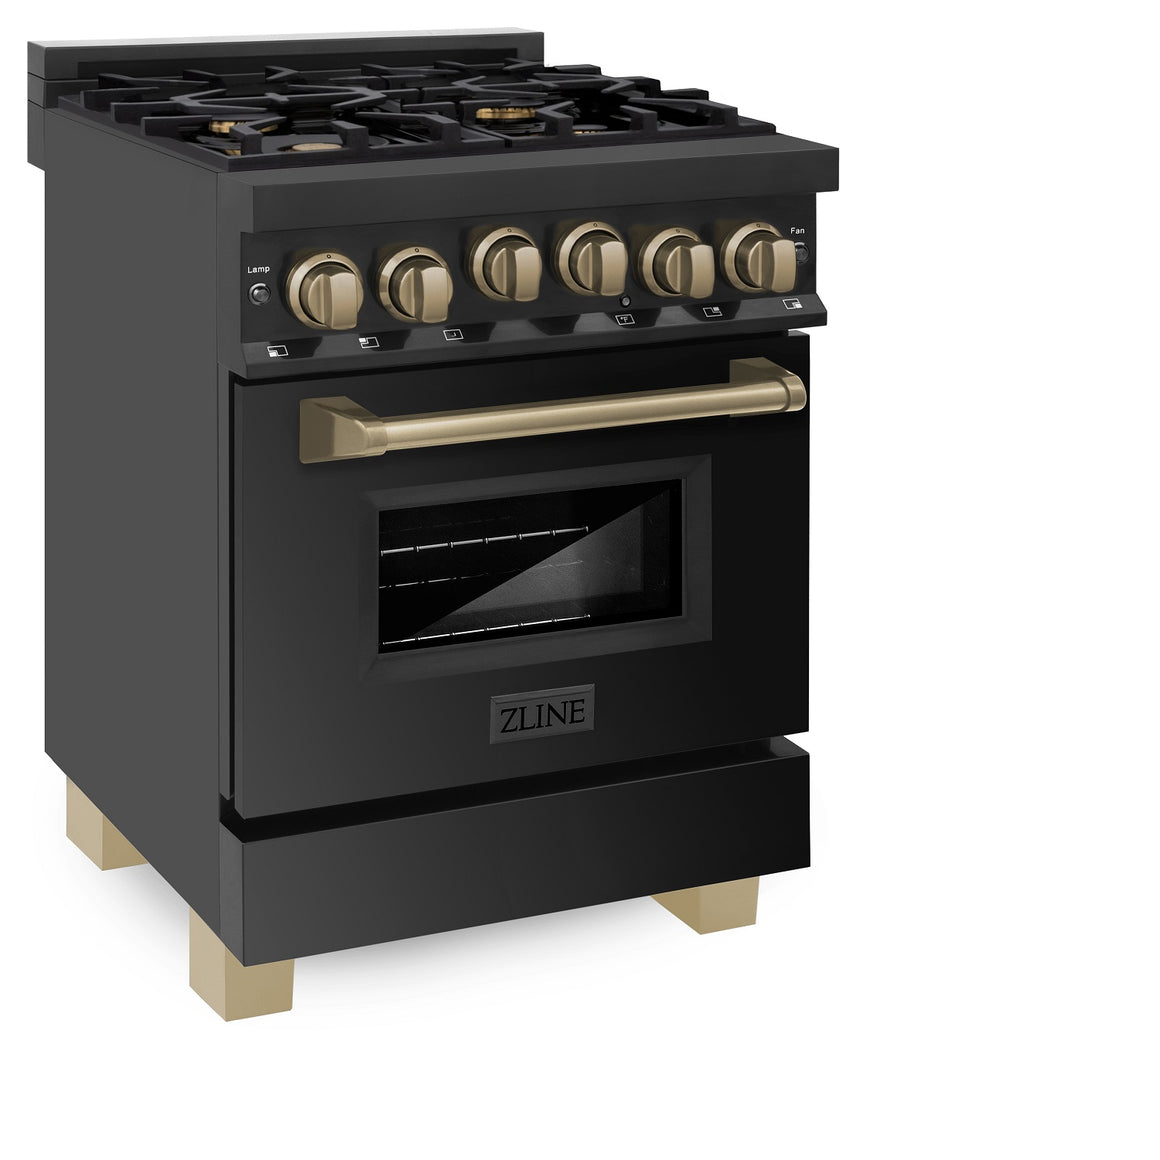 ZLINE Autograph Edition 24" 2.8 cu. ft. Range with Gas Stove and Gas Oven in Black Stainless Steel with Champagne Bronze Accents (RGBZ-24-CB)